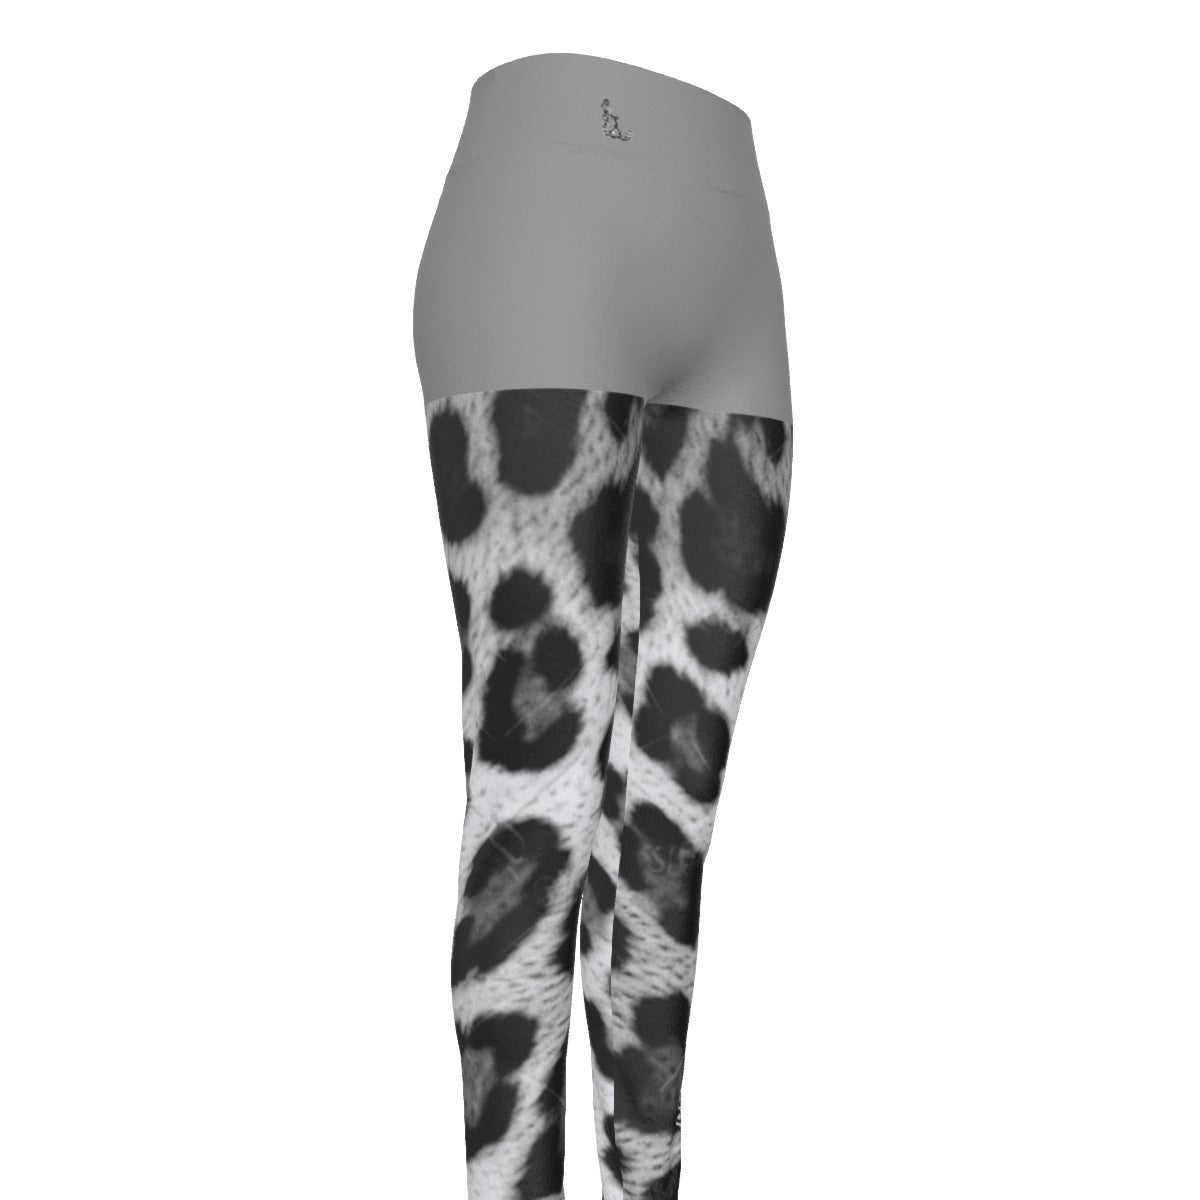 Officially Sexy Grey Snow Leopard Print Collection Women's Grey High Waist Booty Popper Leggings #2 (English) 2